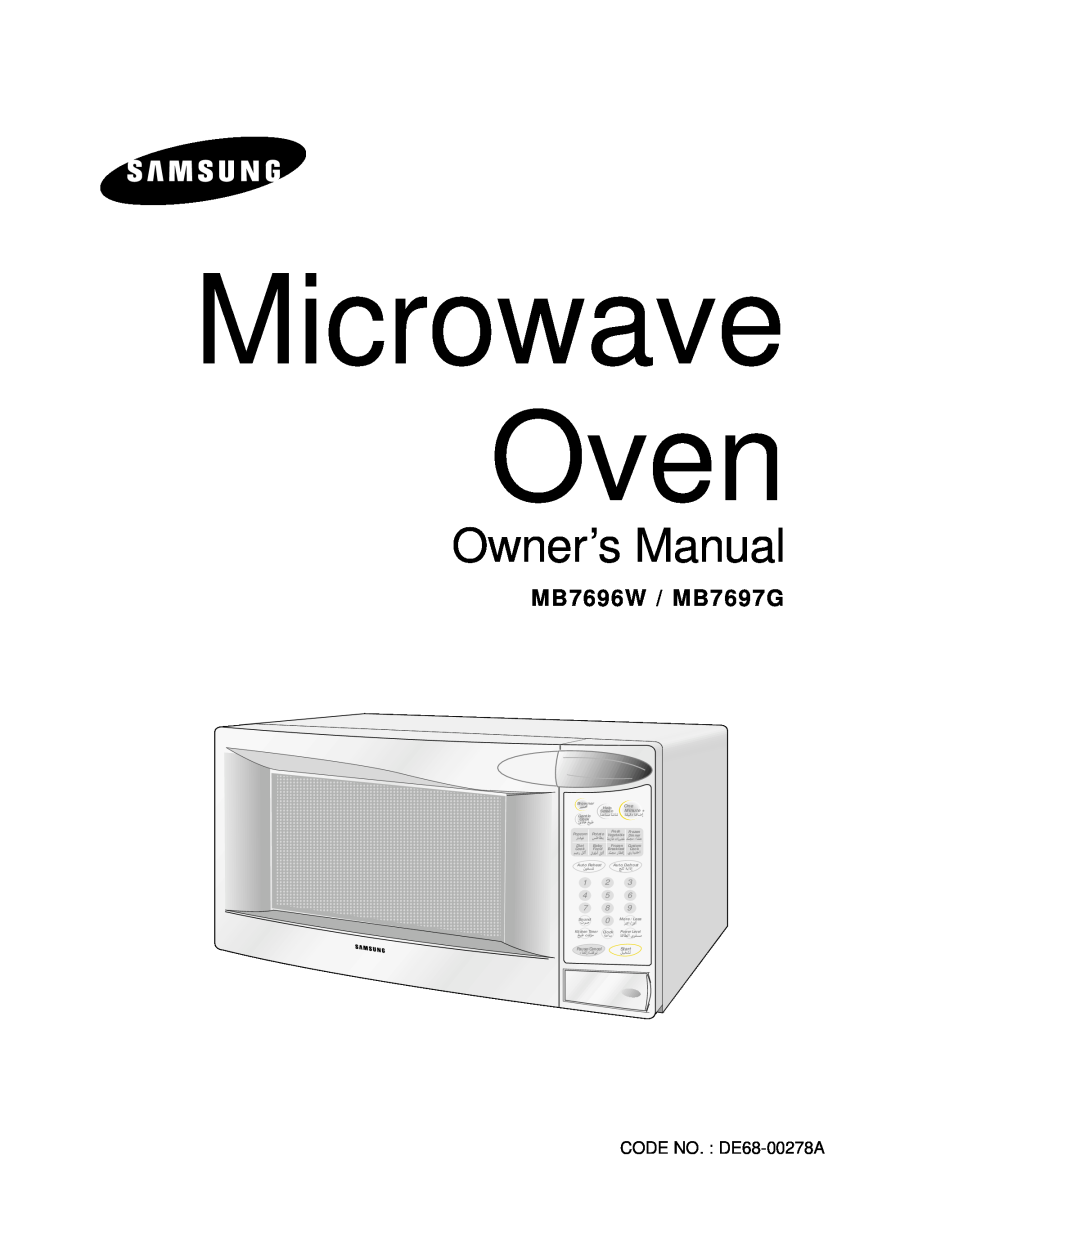 Samsung manual MB7696W / MB7697G, Microwave Oven, Owner’s Manual, Browner, Minute +, Gentle, Cook, Diet, Auto Reheat 